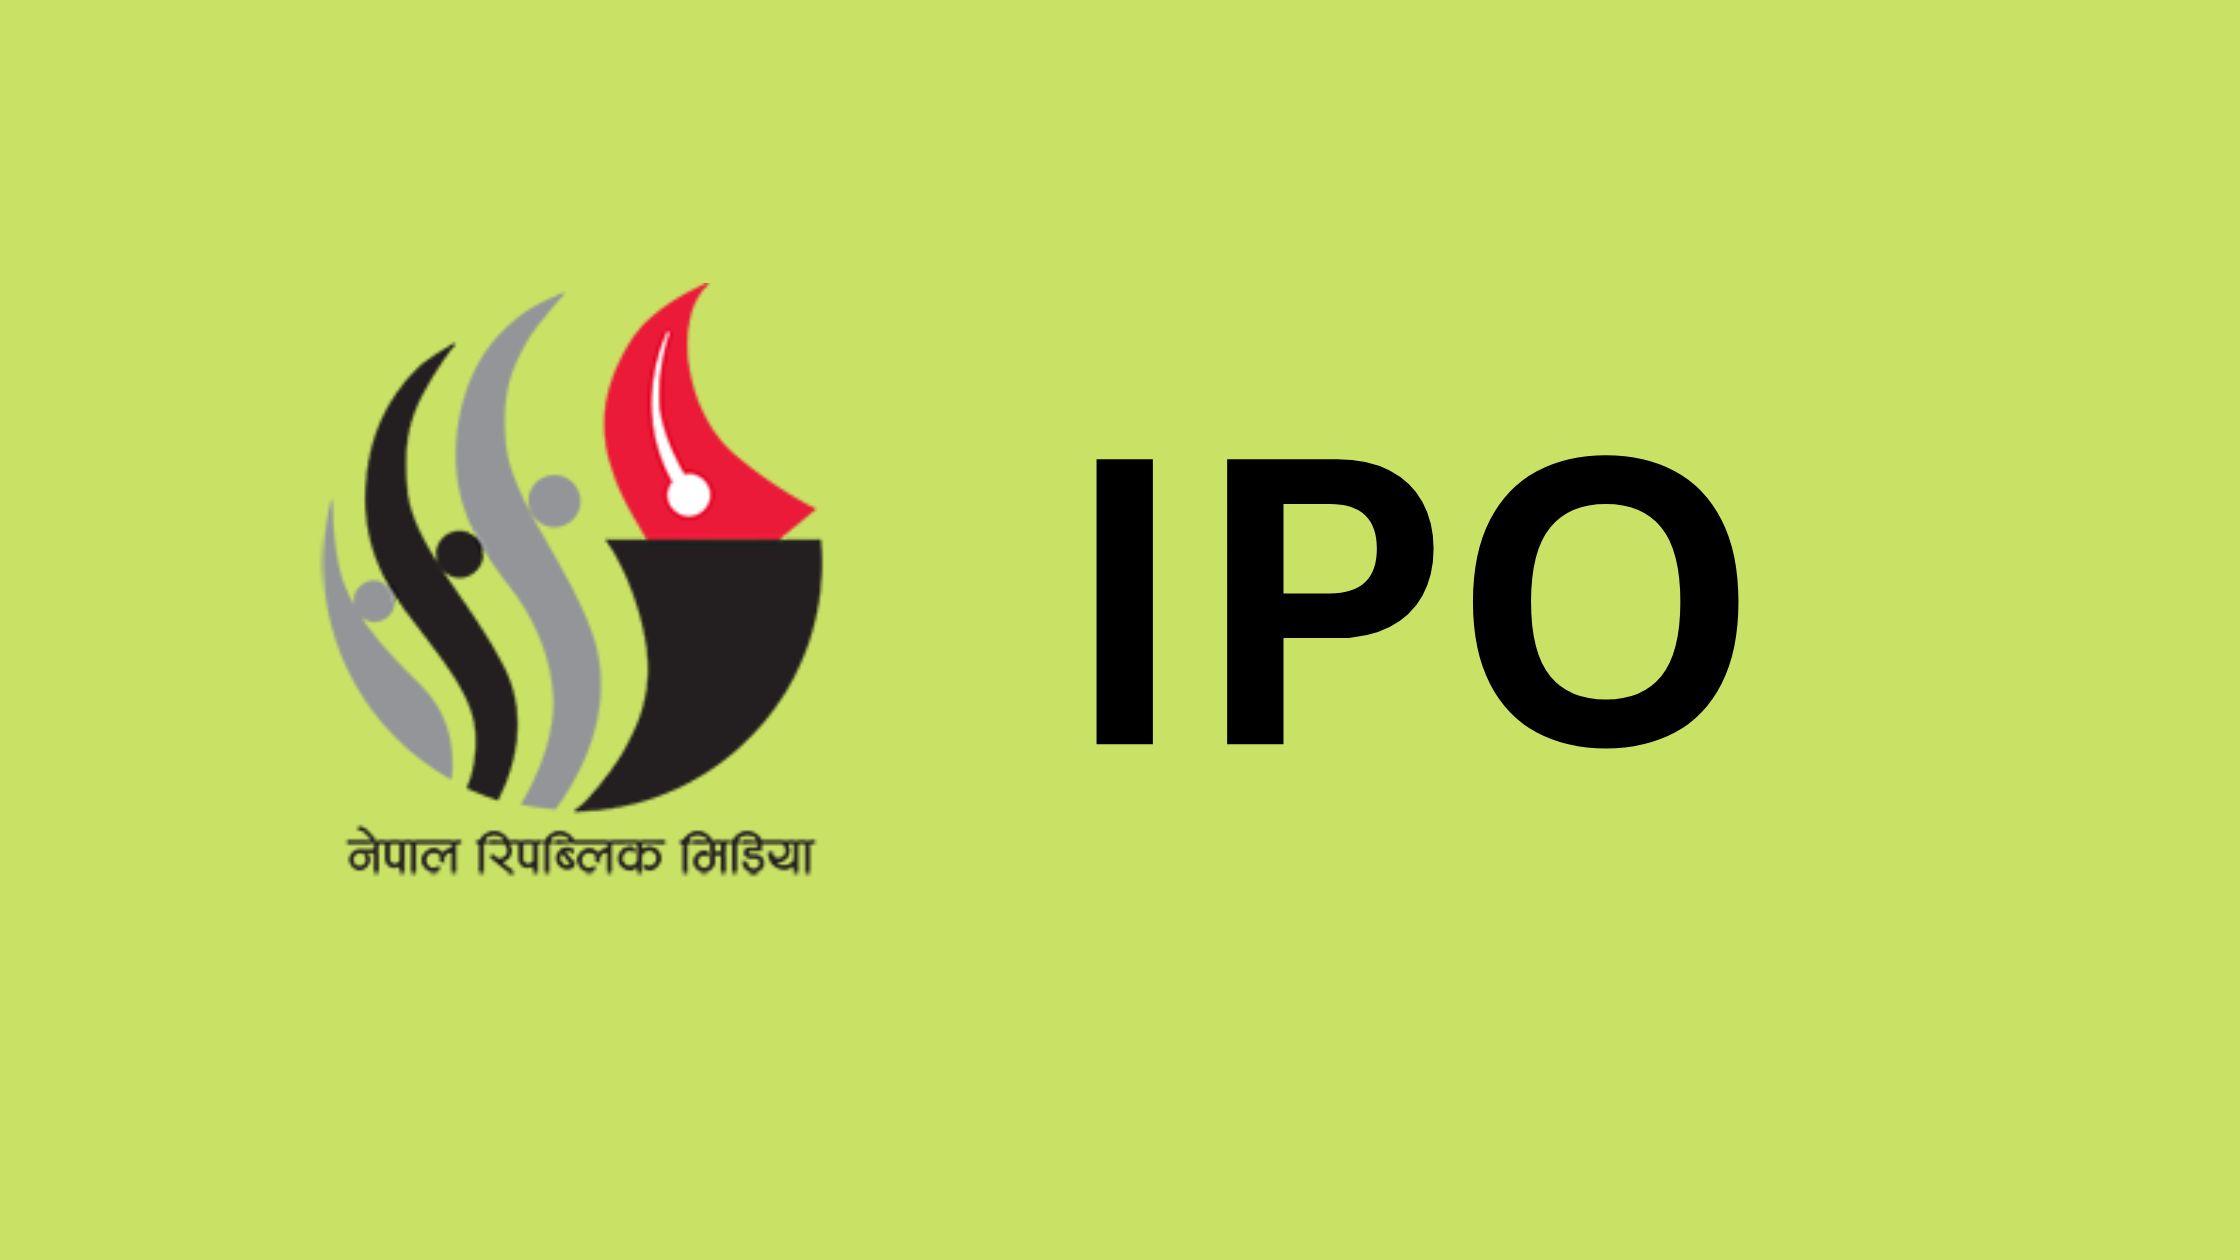 Nepal Republic Media To Issue IPO Worth Rs 43.53 Crores - Nepal On Internet